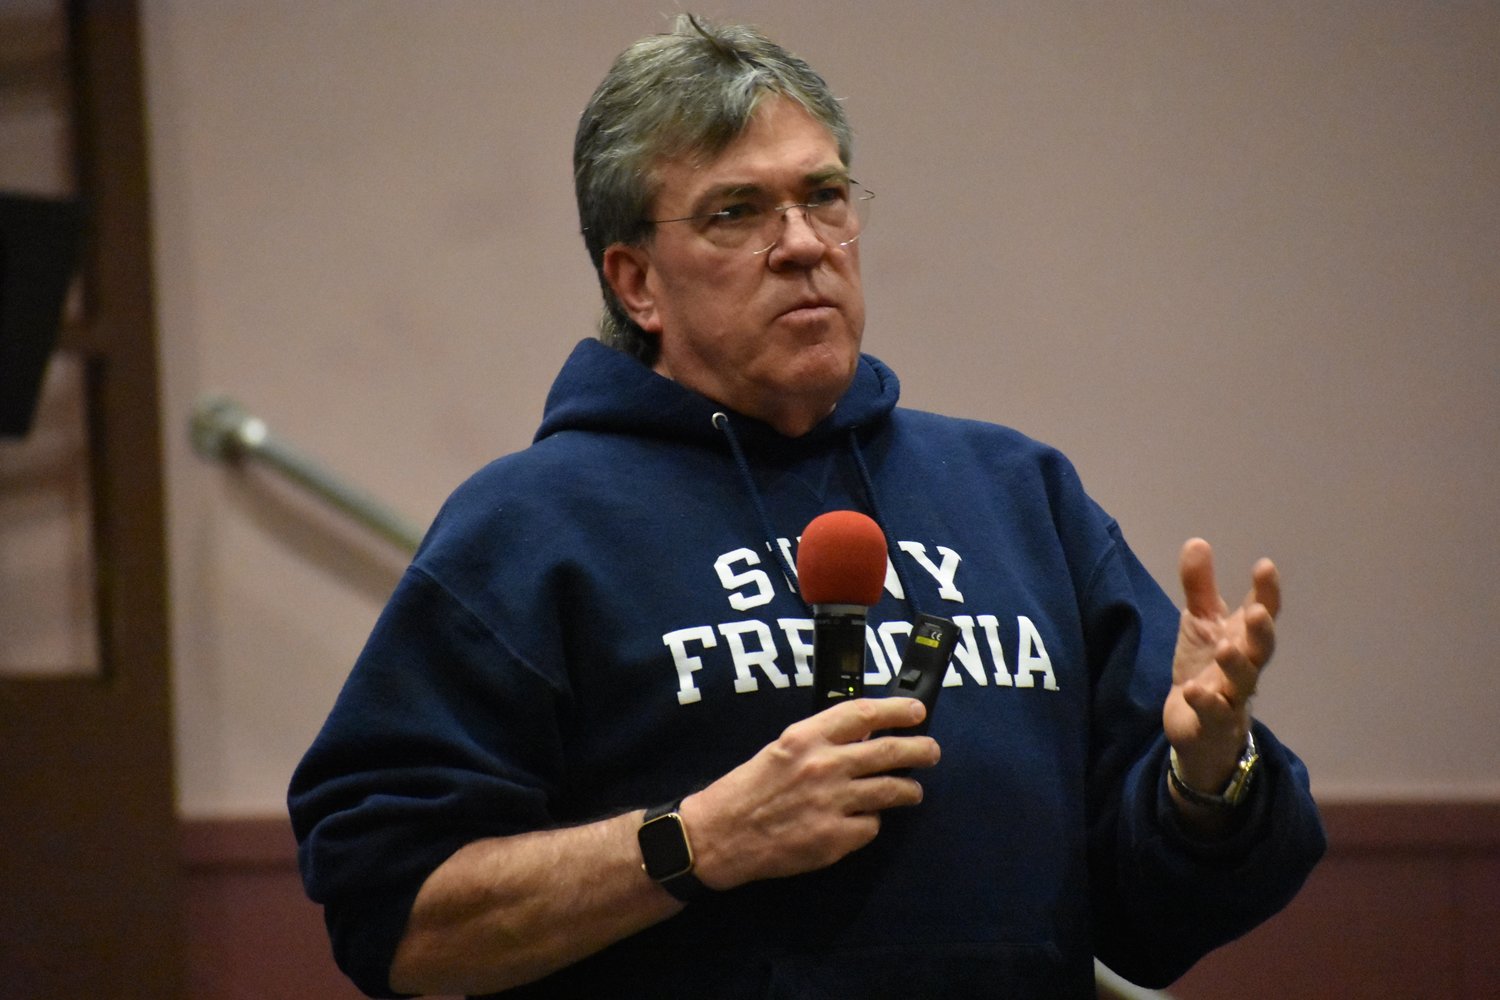 Dr. Stephen Dewey, a research professor at the New York University School of Medicine, spoke to students and parents about addiction at South Side High School on March 20.